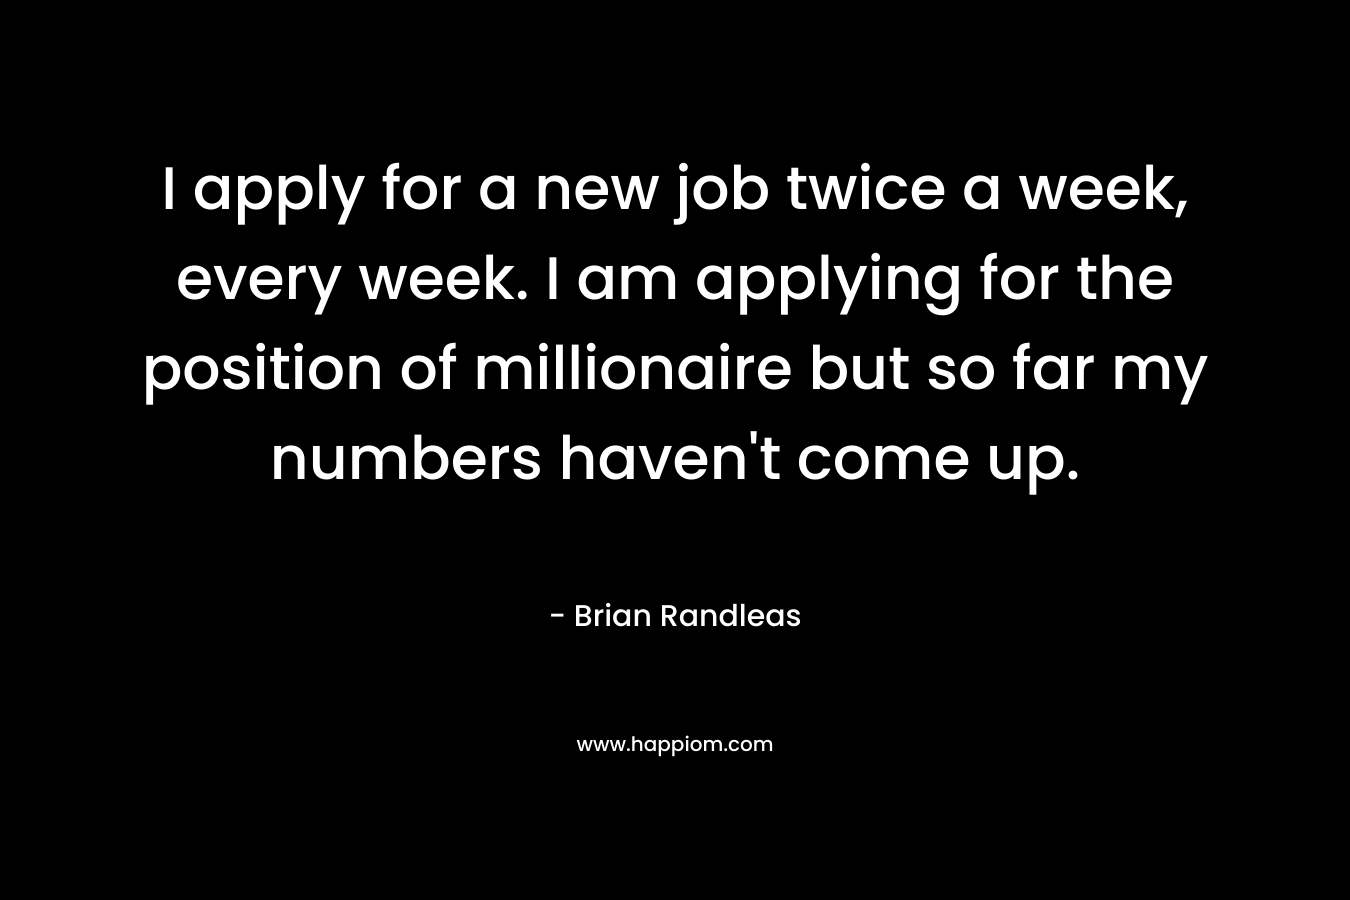 I apply for a new job twice a week, every week. I am applying for the position of millionaire but so far my numbers haven't come up.